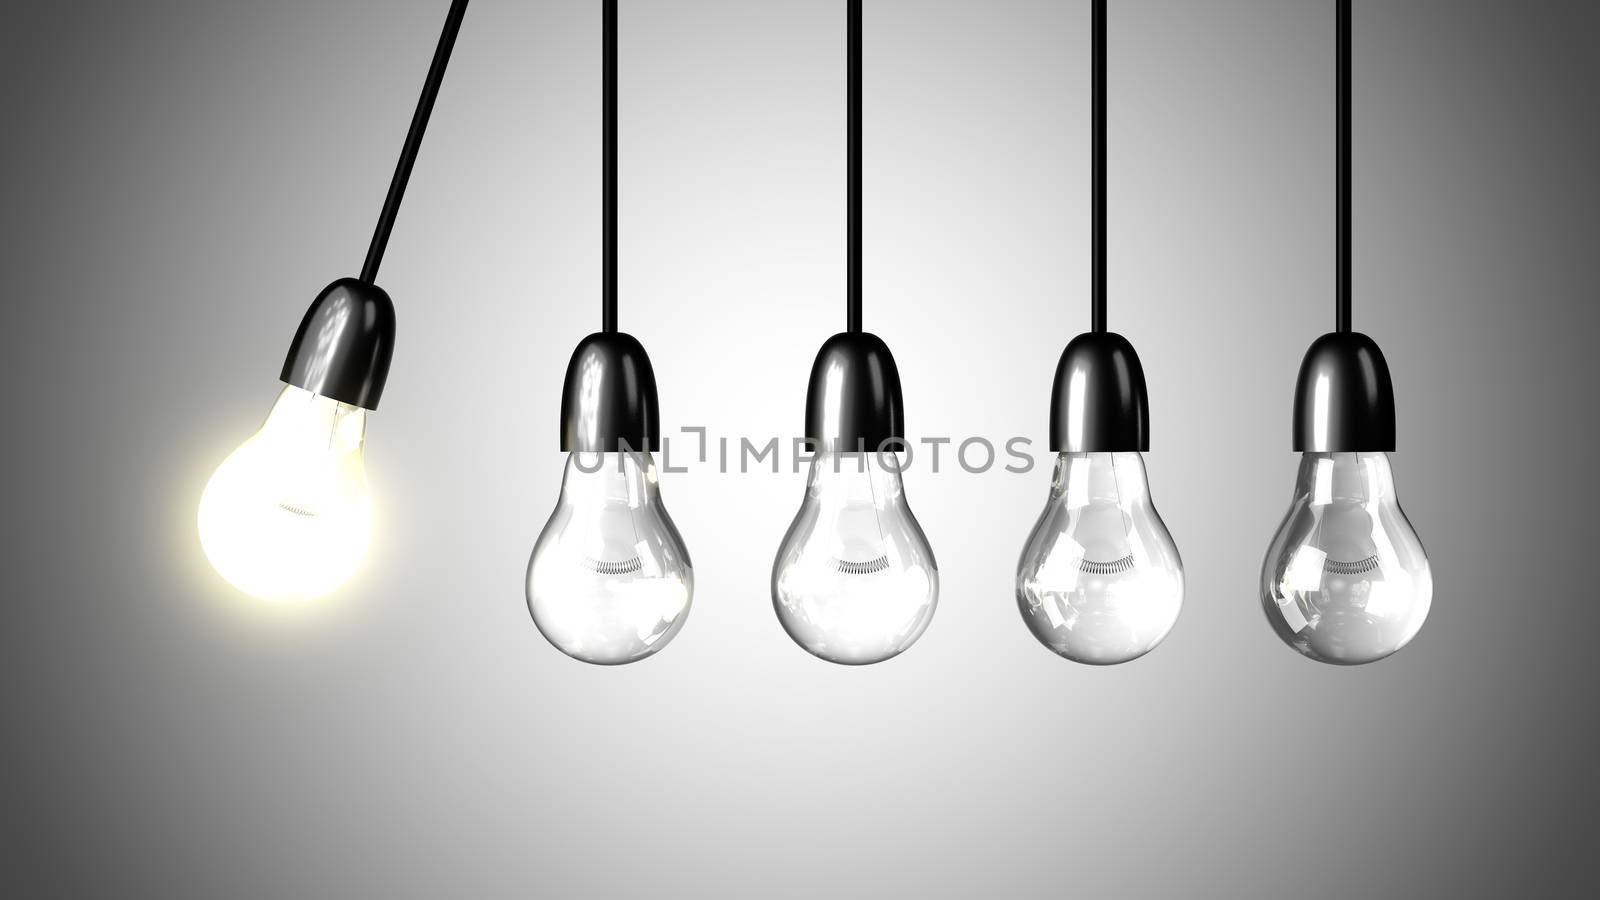 A lit light bulb will boost other extinguished bulbs. Newton's cradle concept. Realistic 3d render